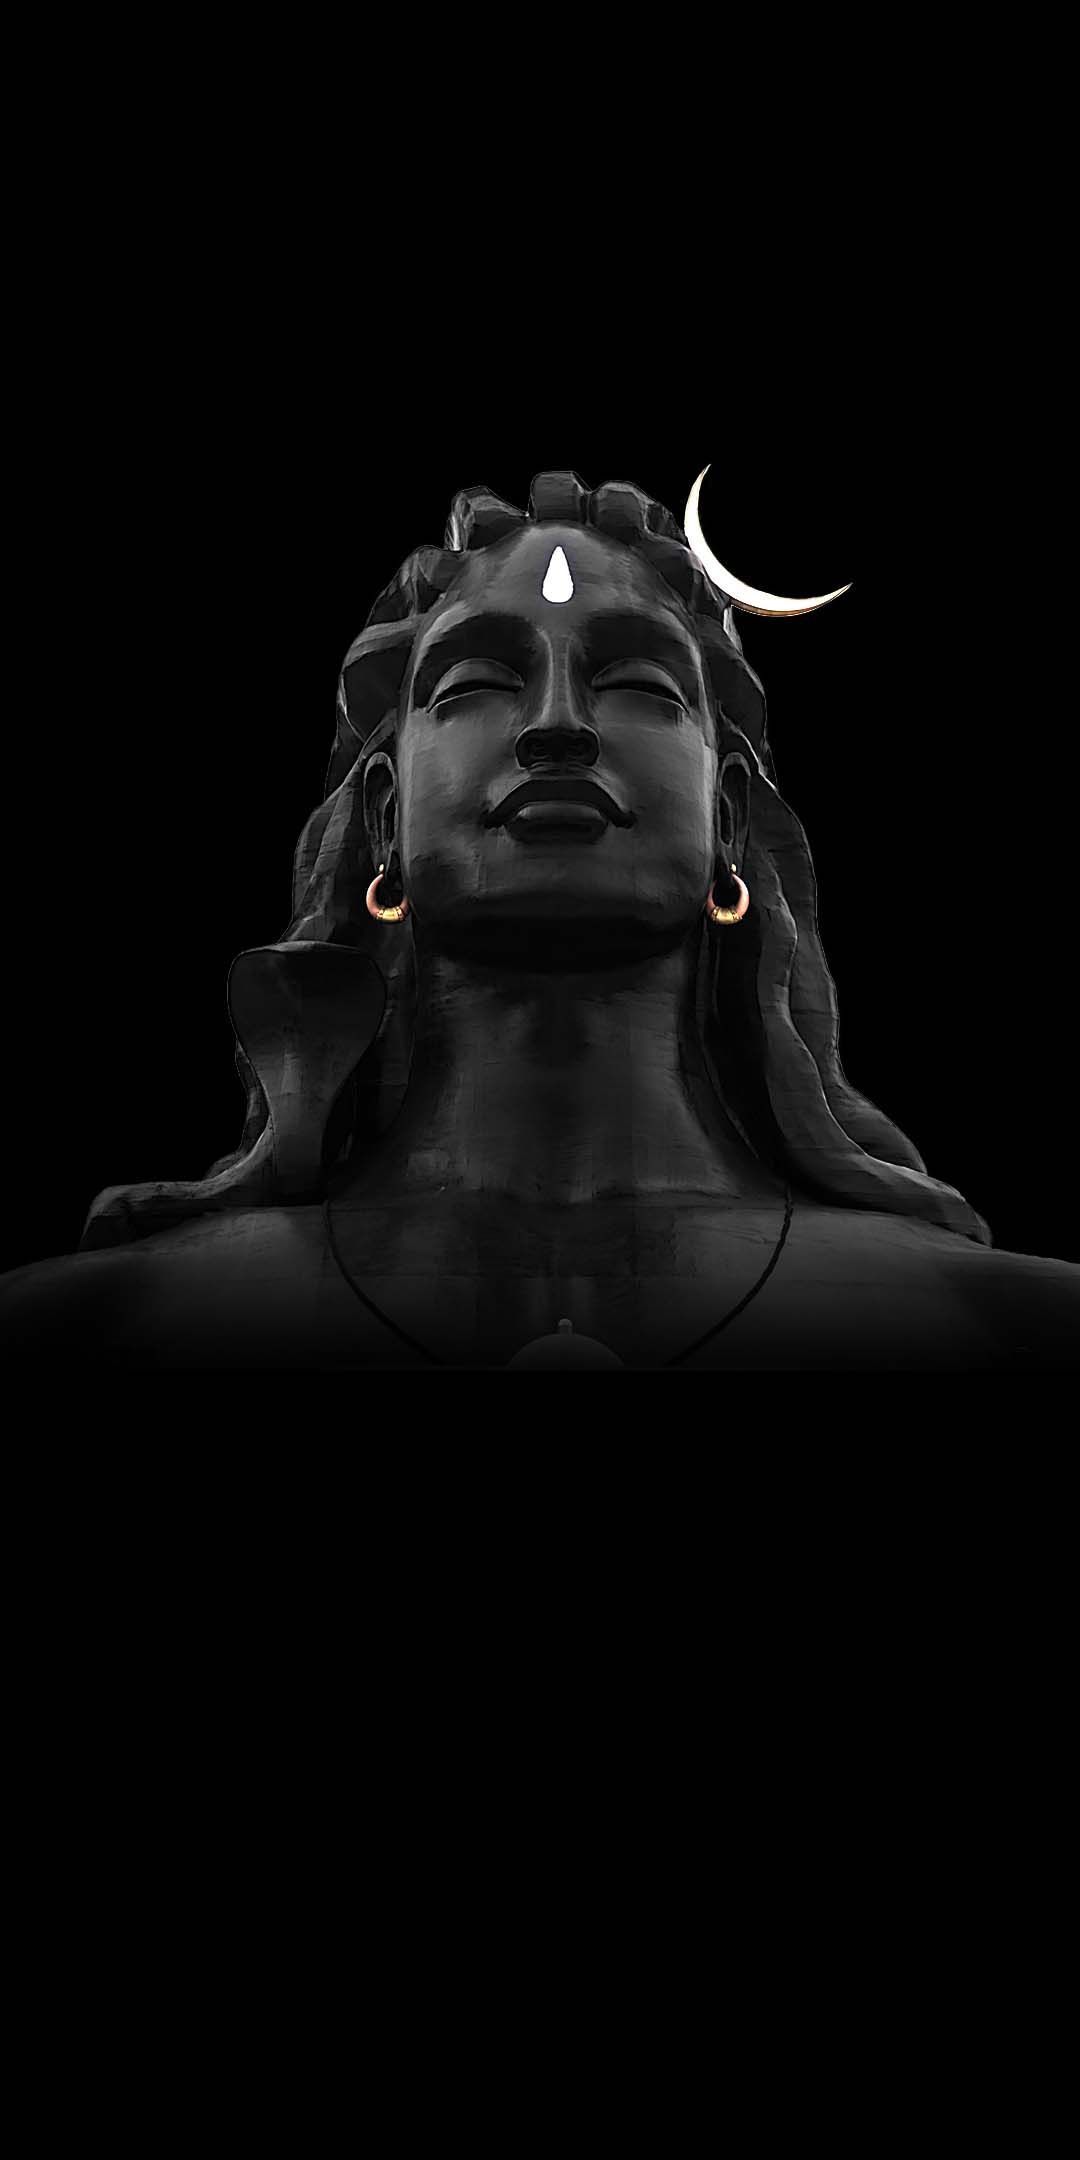 Amoled Lord Shiva Wallpapers - Wallpaper Cave